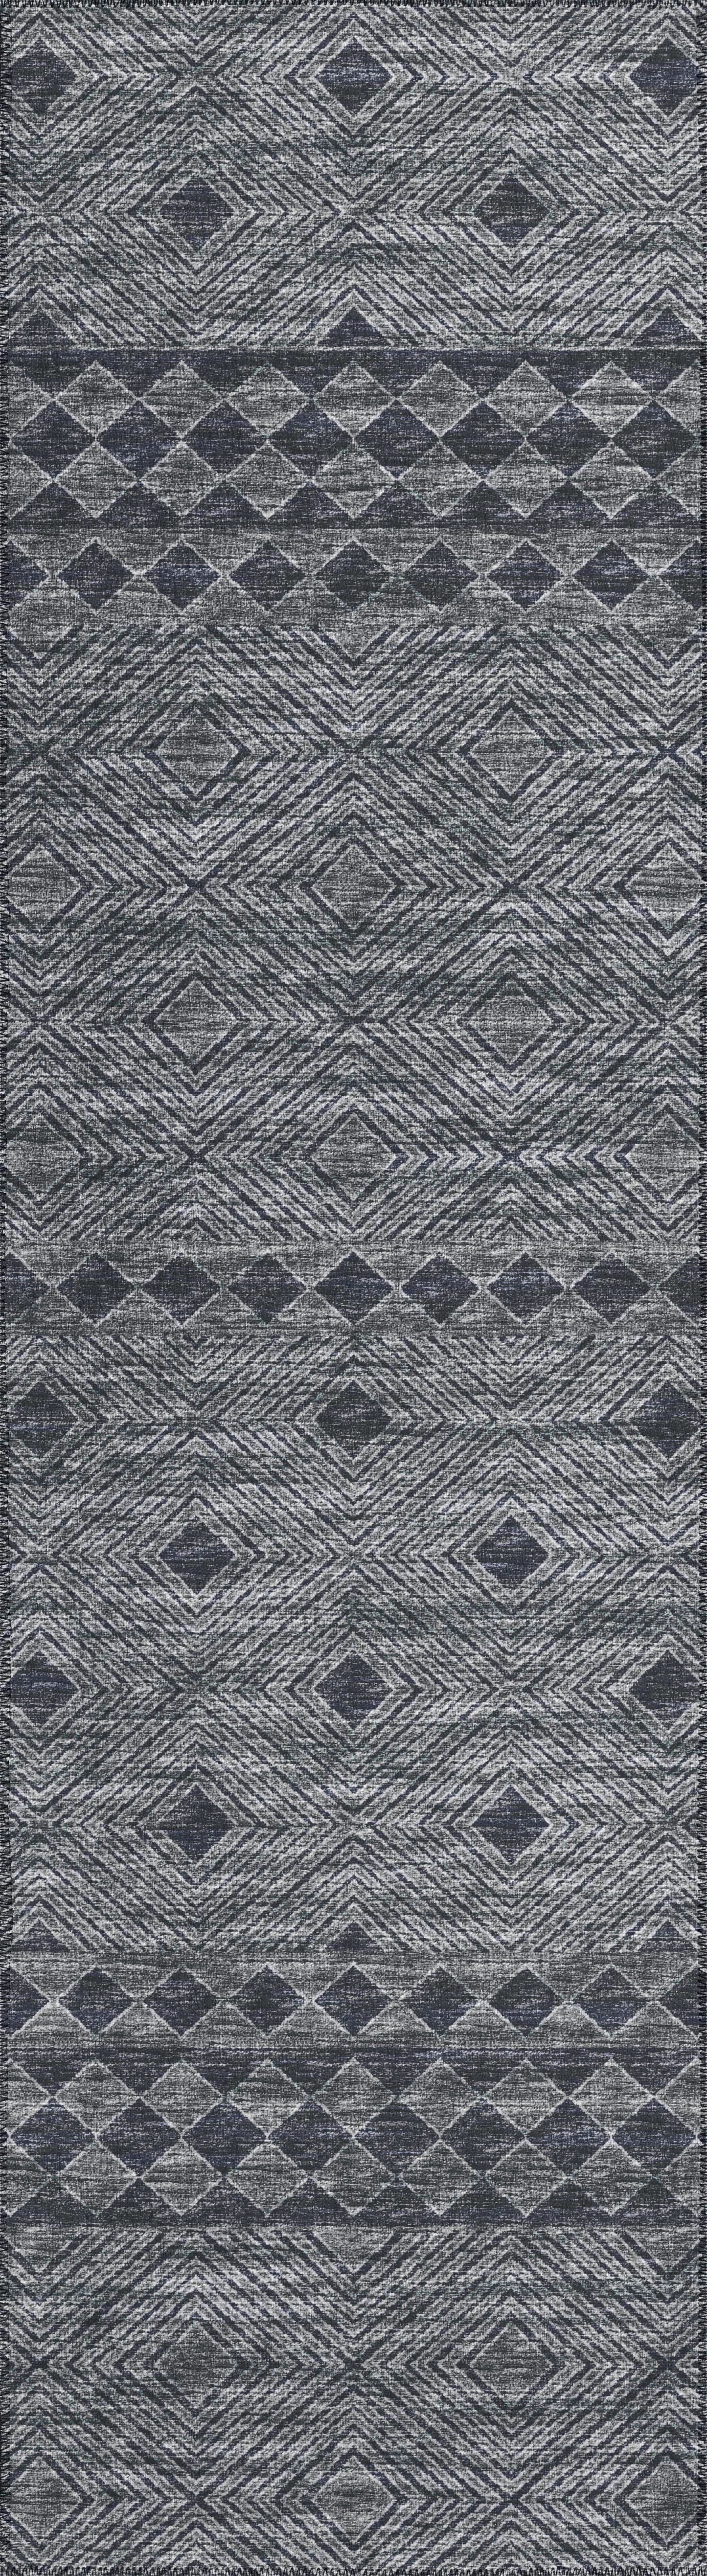 Sedona SN1 Machine Made Synthetic Blend Indoor Area Rug by Dalyn Rugs